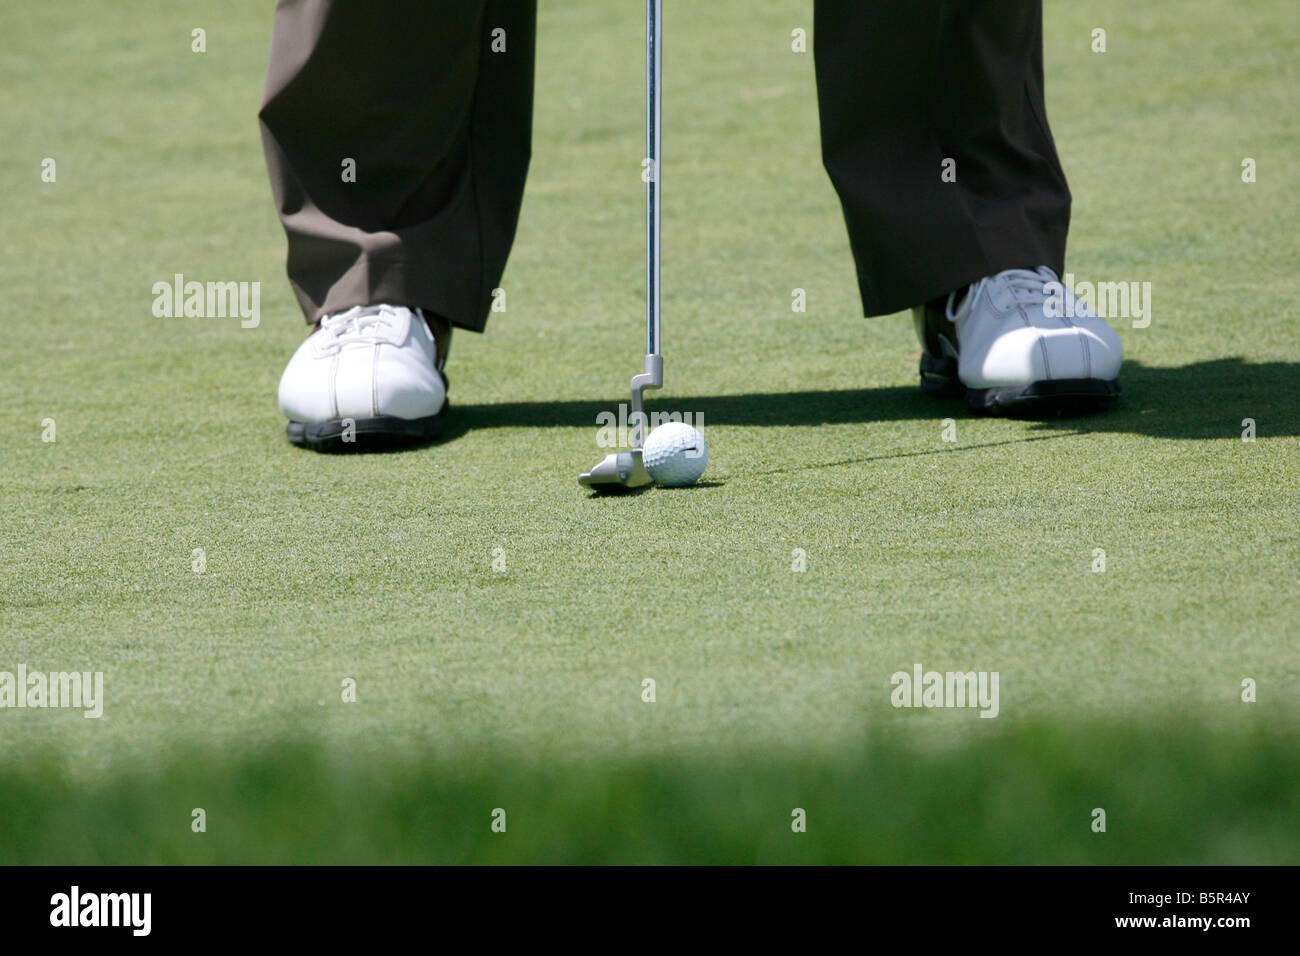 Close up of a golfer's feet, putter and ball on the putting green. Stock Photo